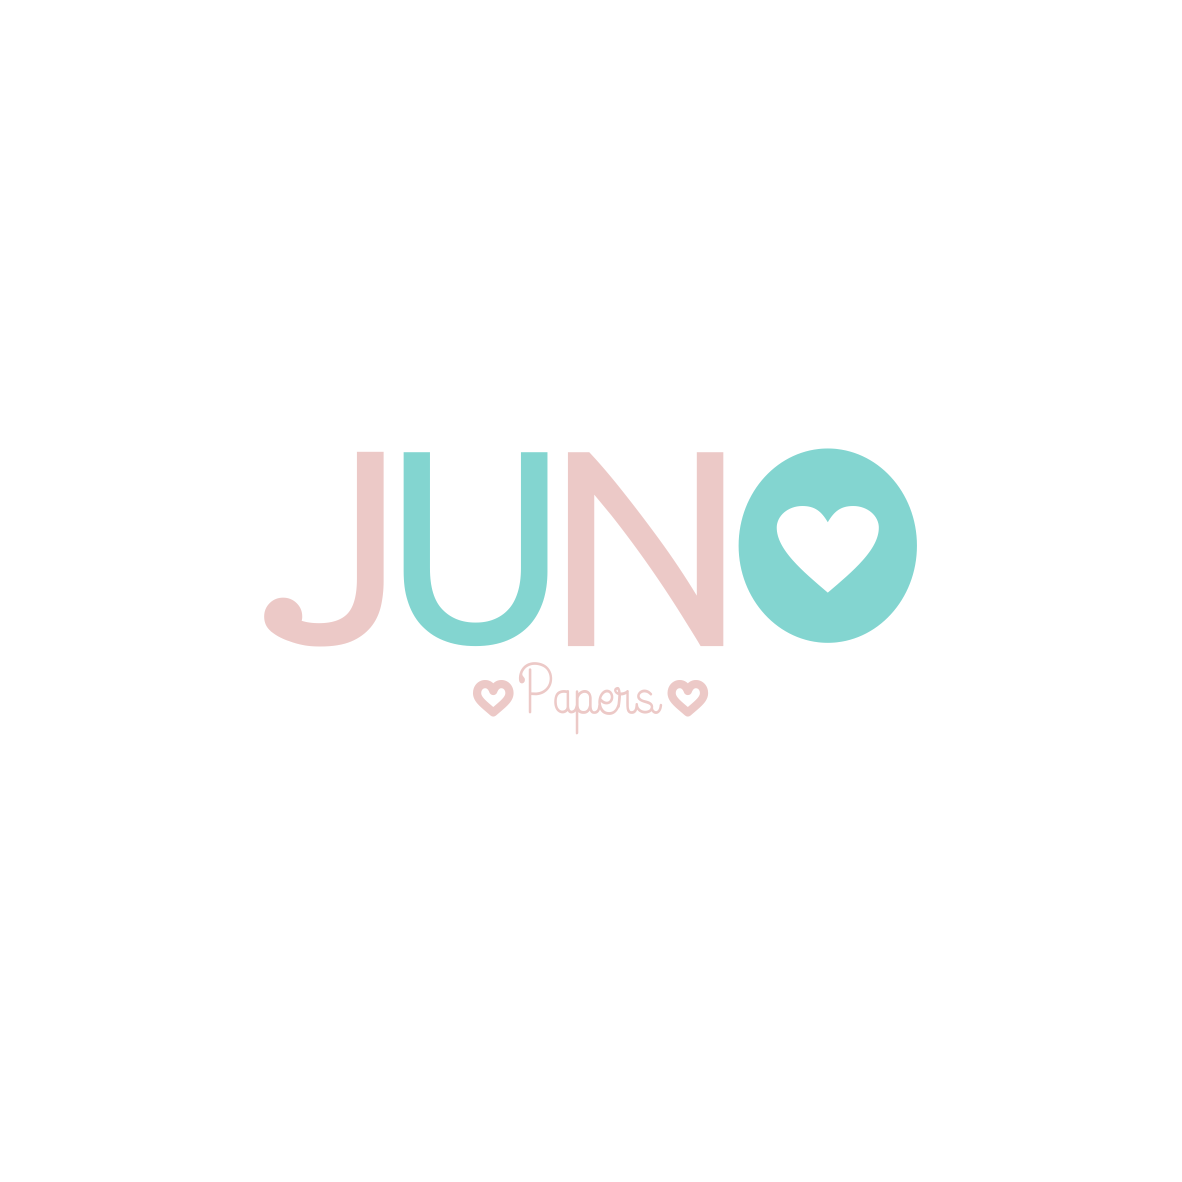 Juno Papers